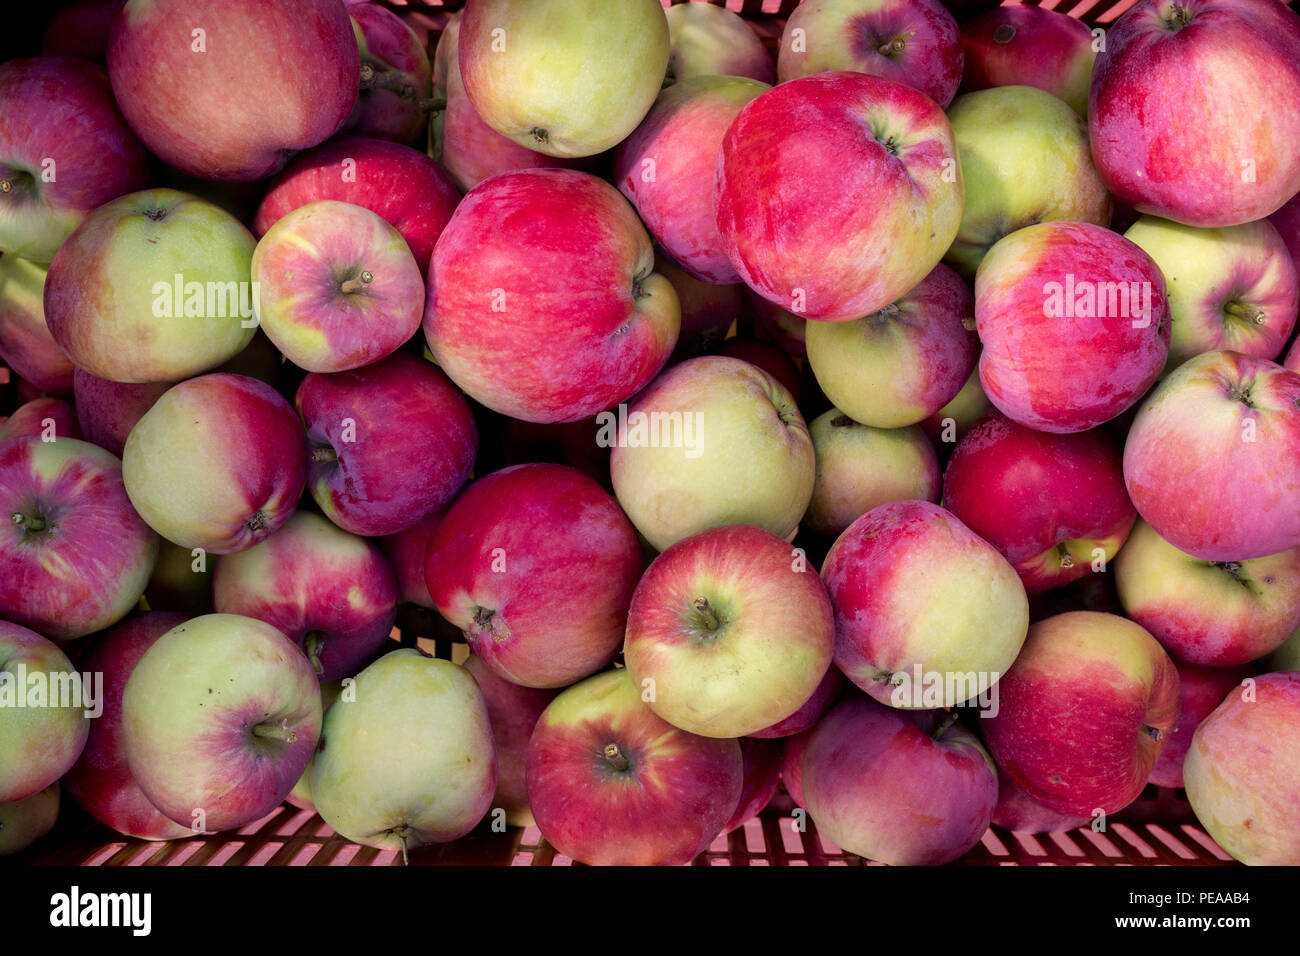 https://c8.alamy.com/comp/PEAAB4/malus-domestica-red-melba-harvested-apples-red-melba-from-above-uk-PEAAB4.jpg